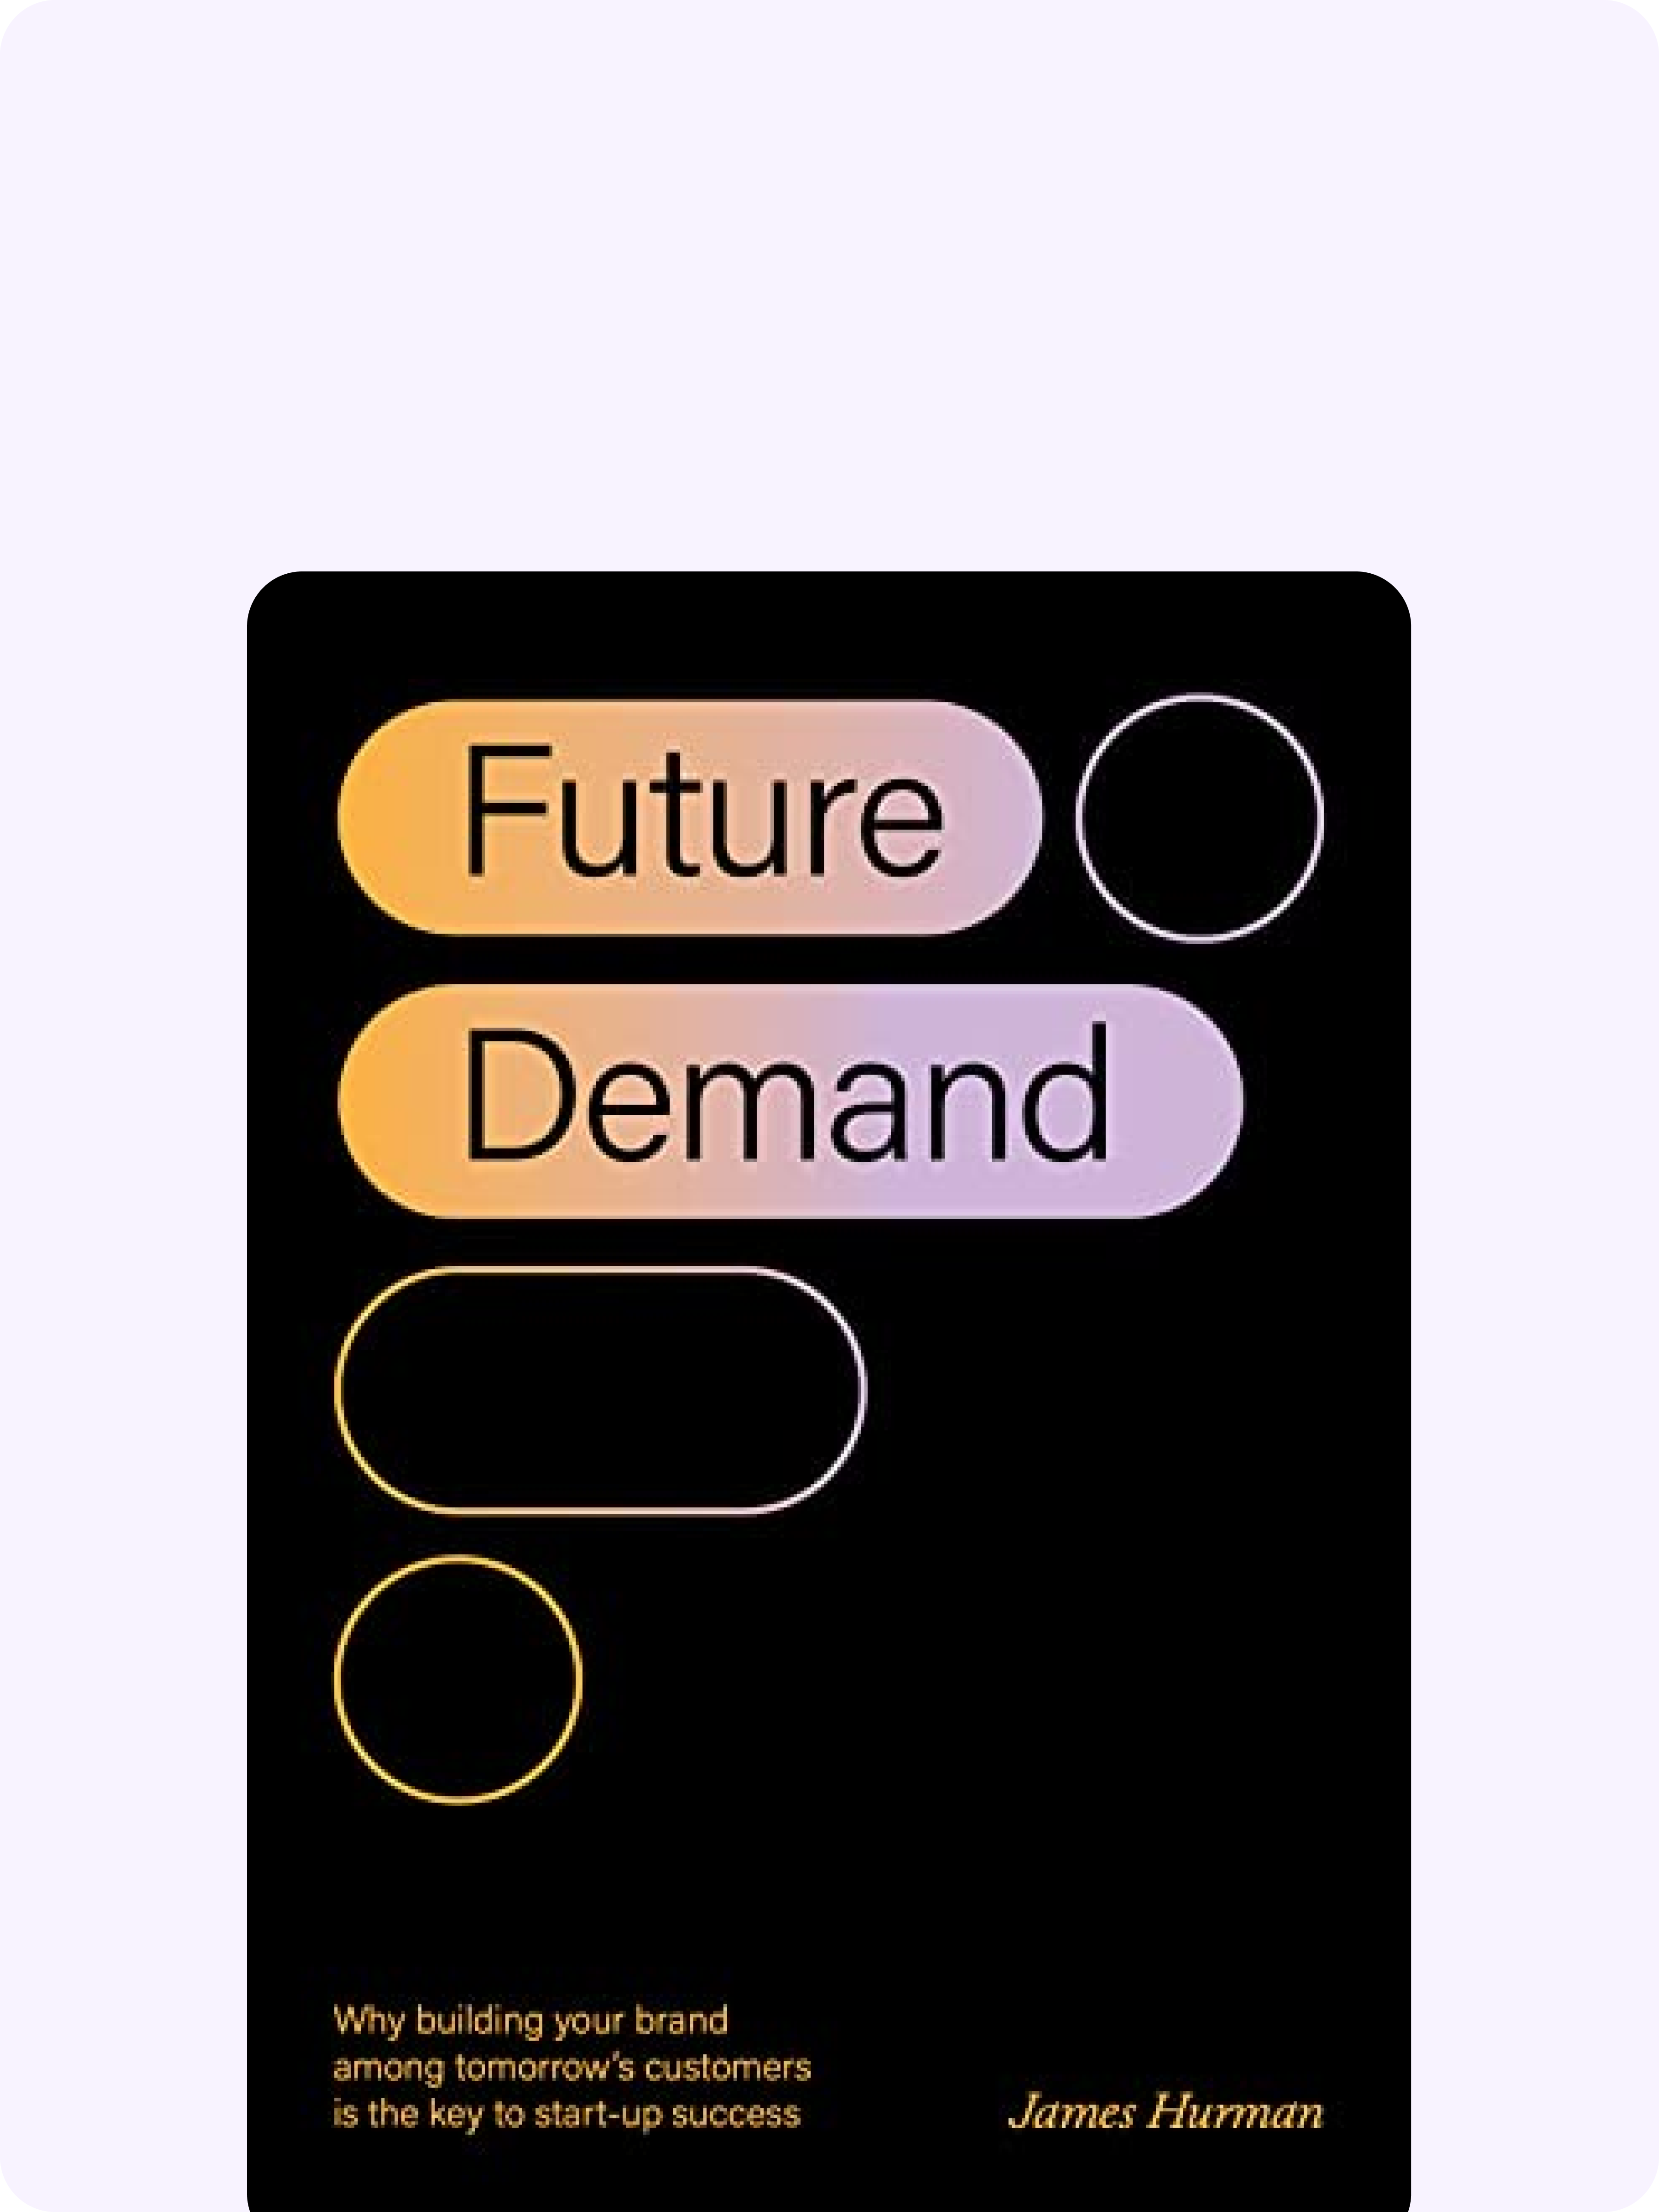 Future Demand: What it is, and how it can help grow your business